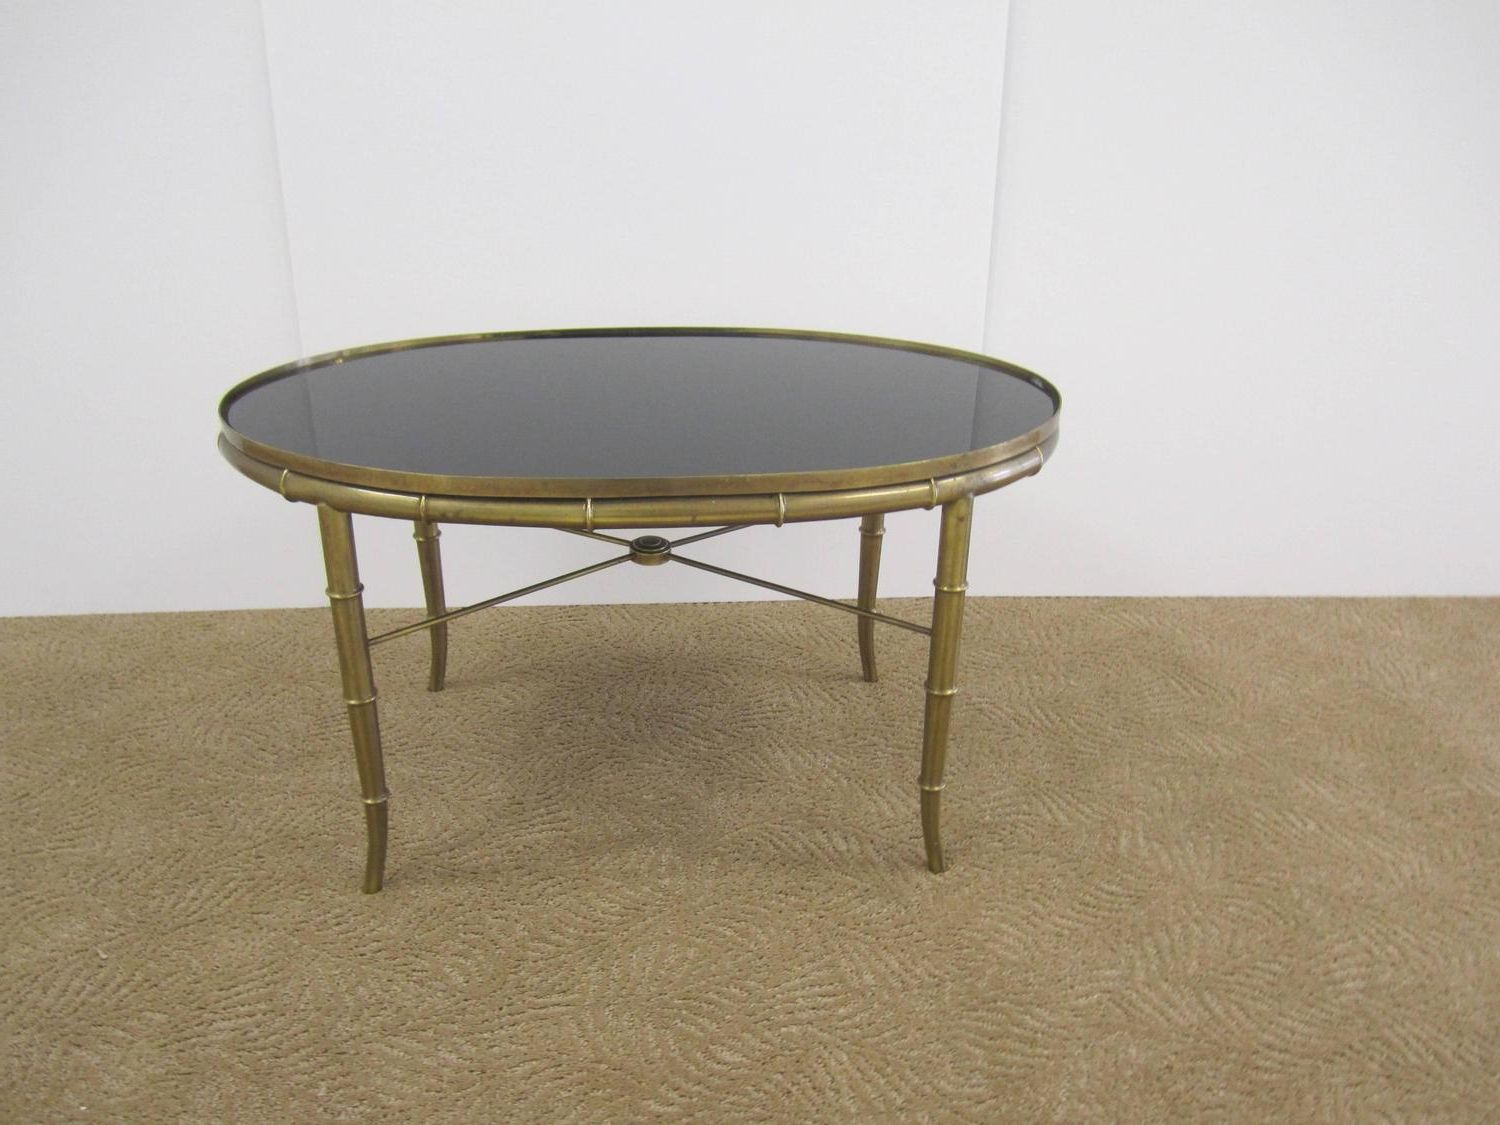 Vintage Italian Brass Cocktail Table With Black Mirrored Pertaining To Popular Antique Brass Round Cocktail Tables (View 1 of 20)